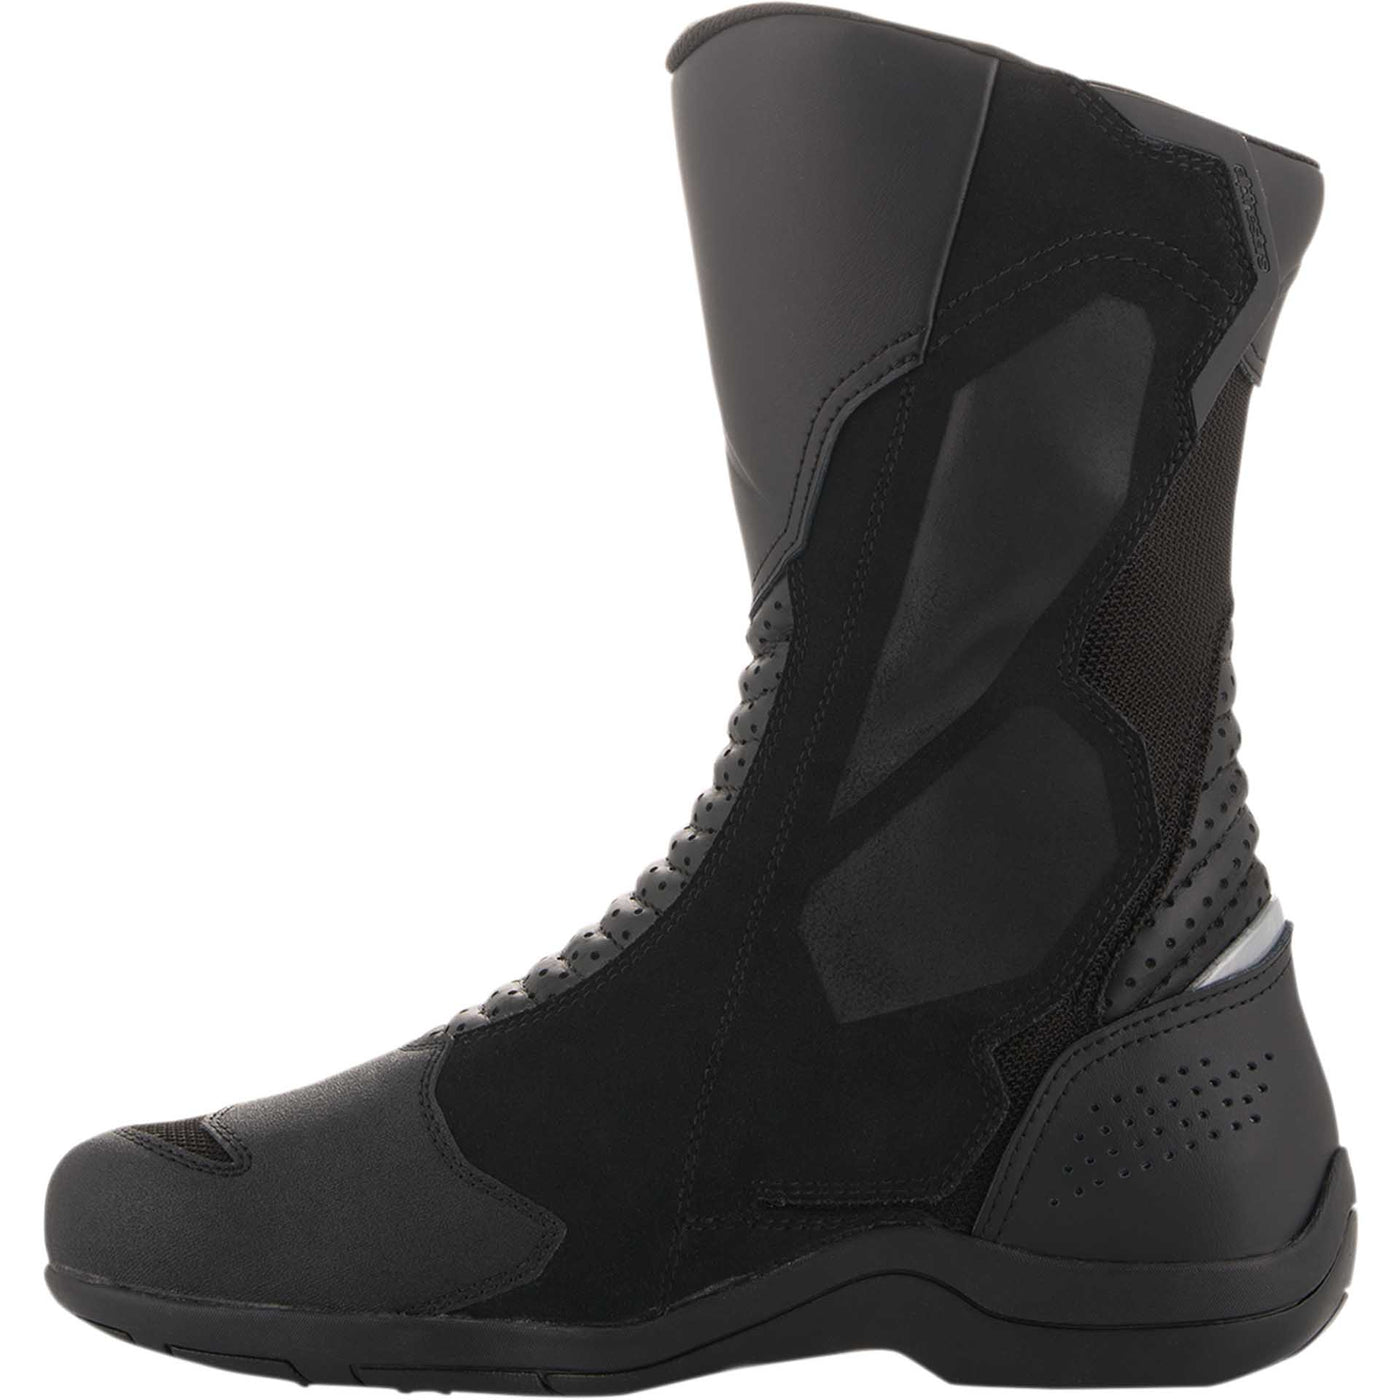 Alpinestars Air Plus v2 Gore-Tex® XCR Boots Motorcycle Street Boots